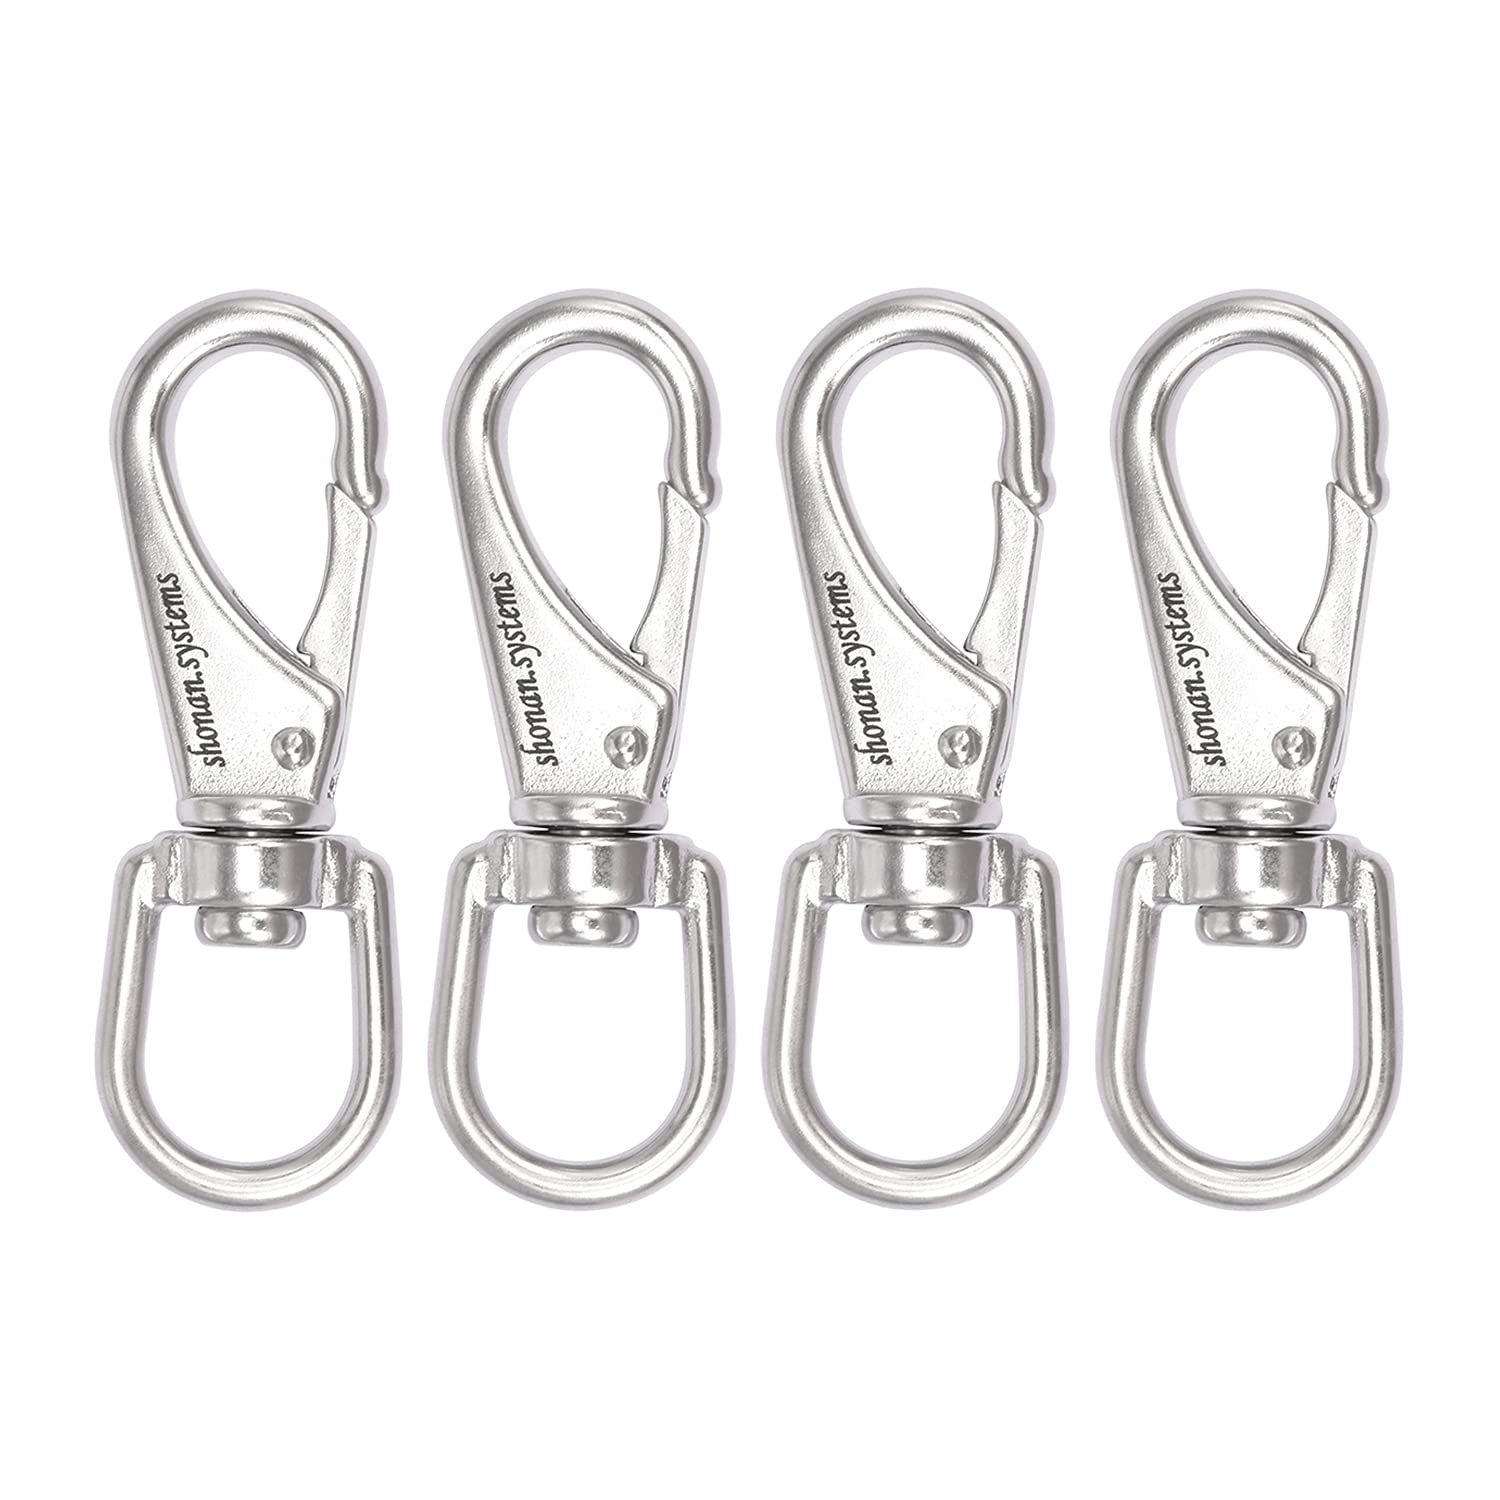 SHONAN Stainless Steel Flag Clips for Flagpole Rope- 4 Pack 3.5